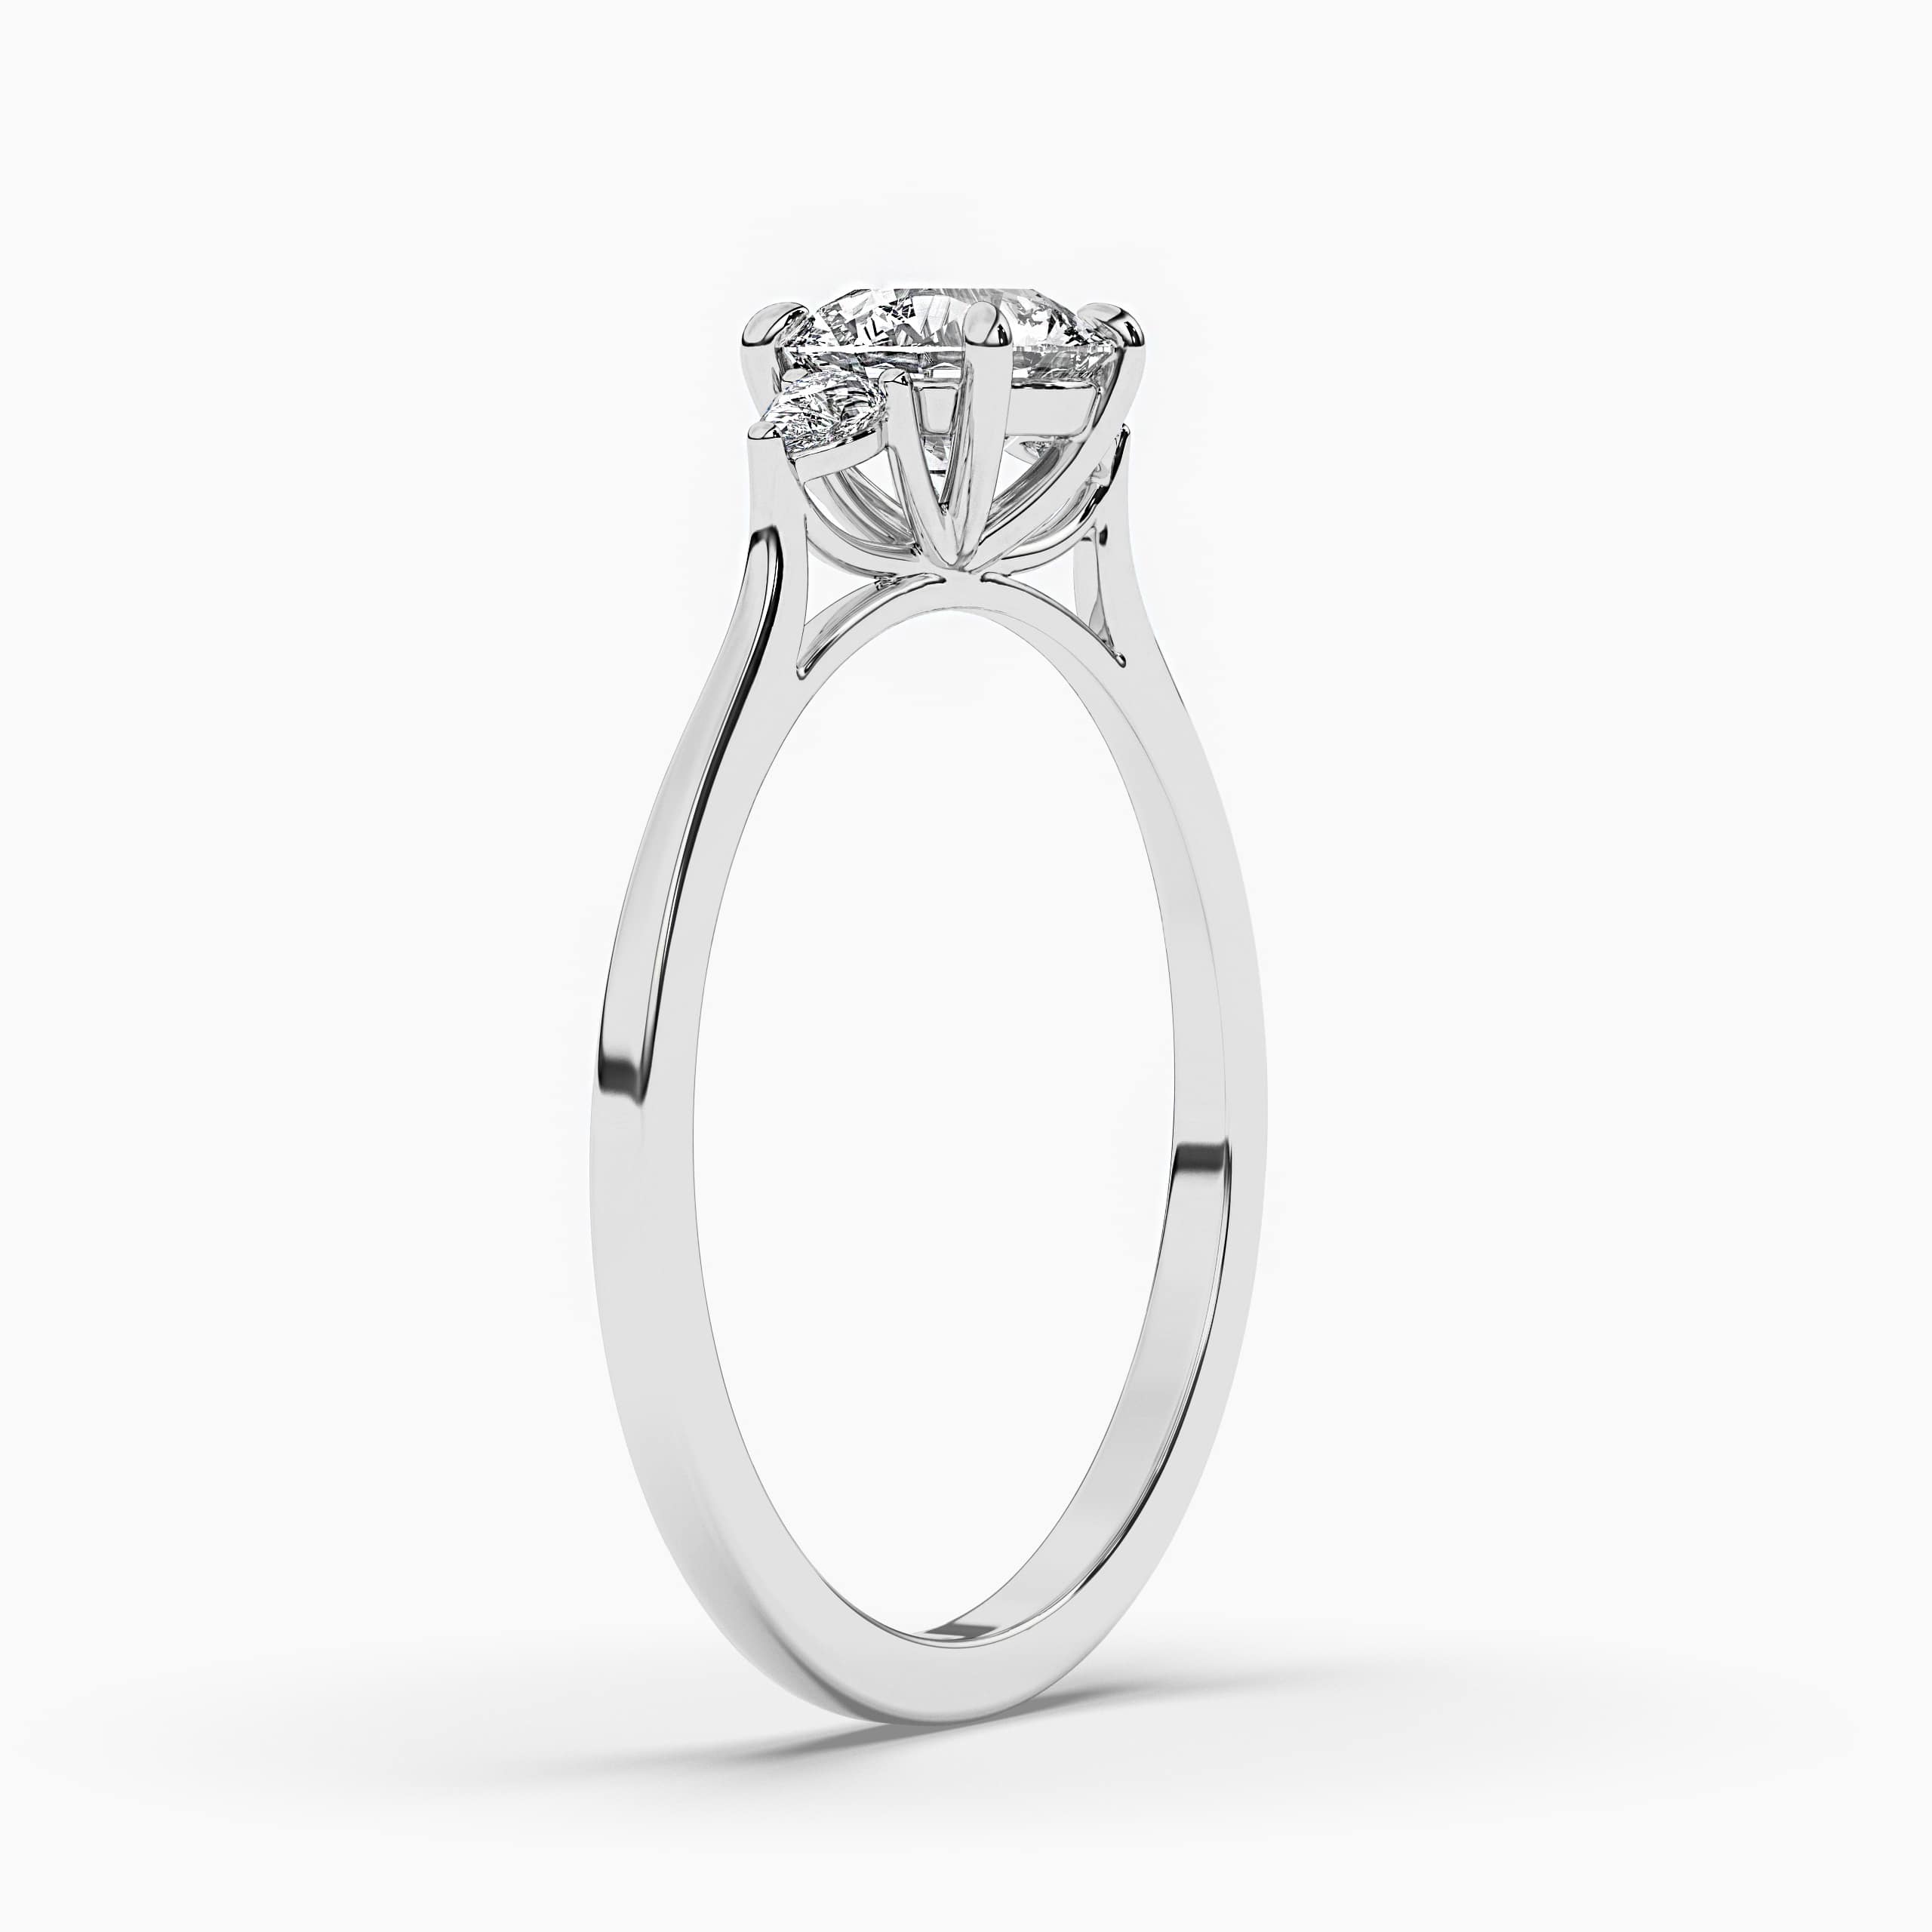 White Gold Prong Simulated Diamond Engagement Ring with Side Stones